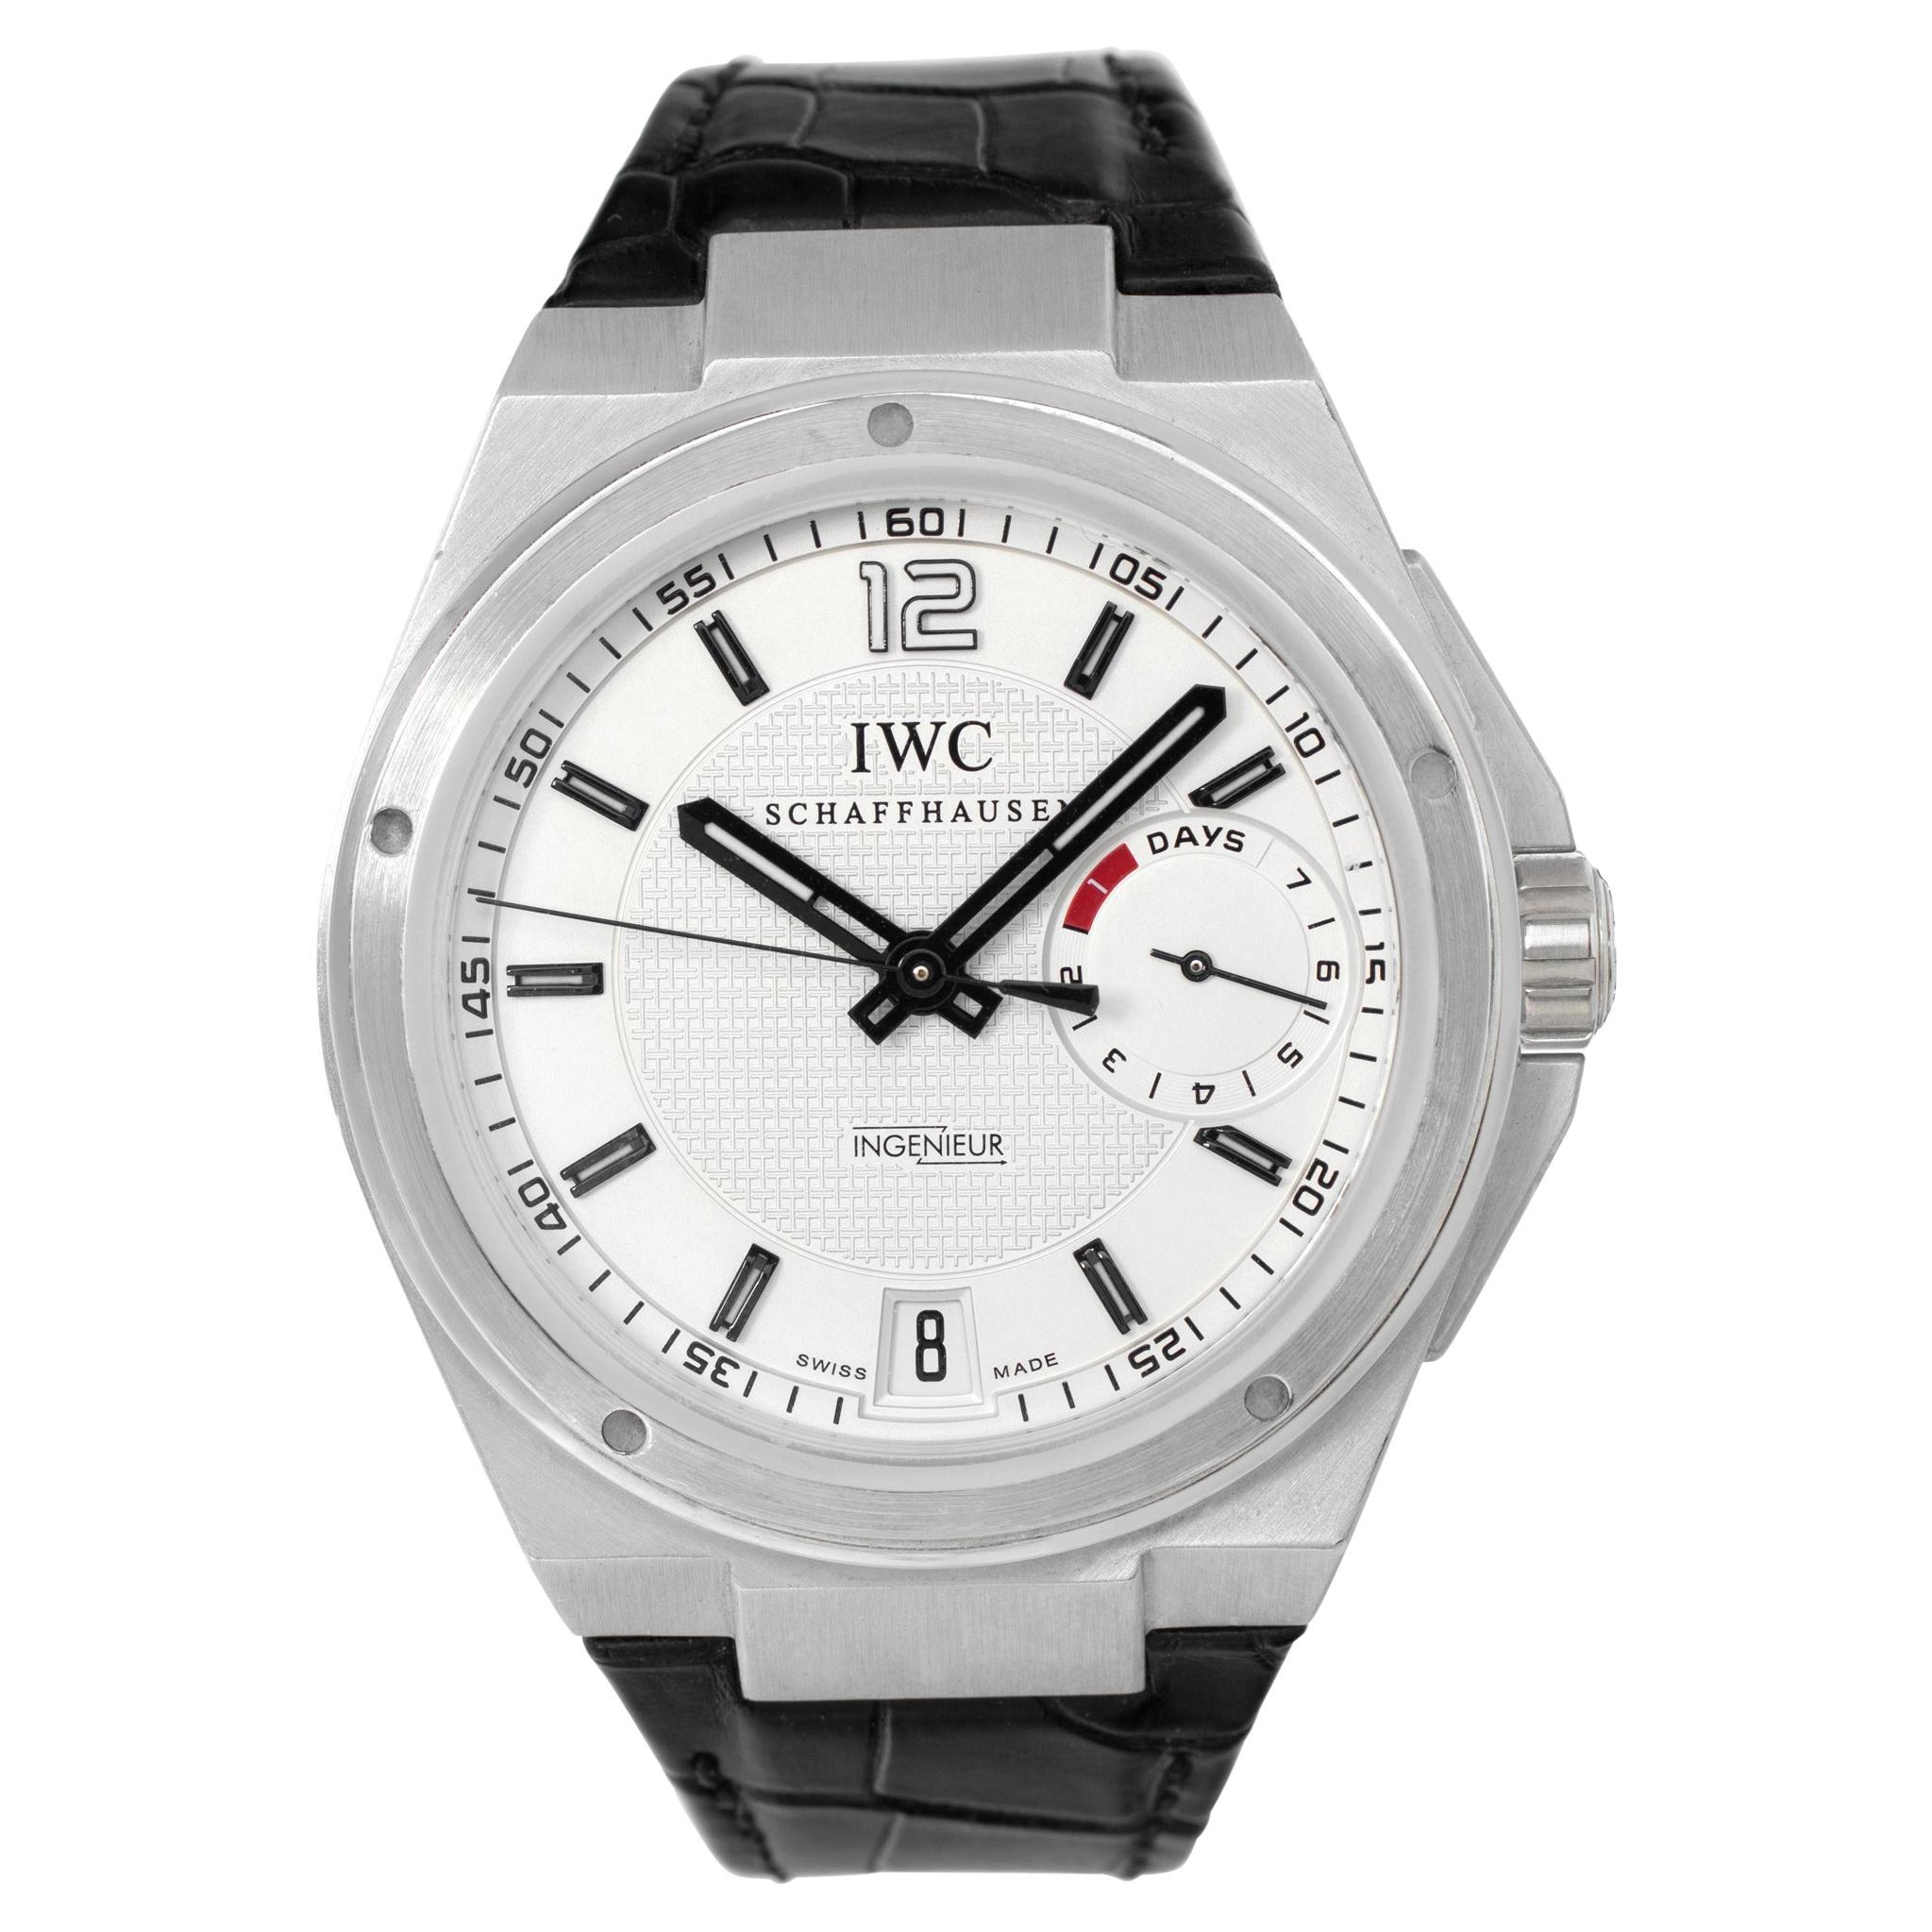 IWC Ingenieur IW500502 in Platinum with a Silver dial 45mm Automatic watch For Sale